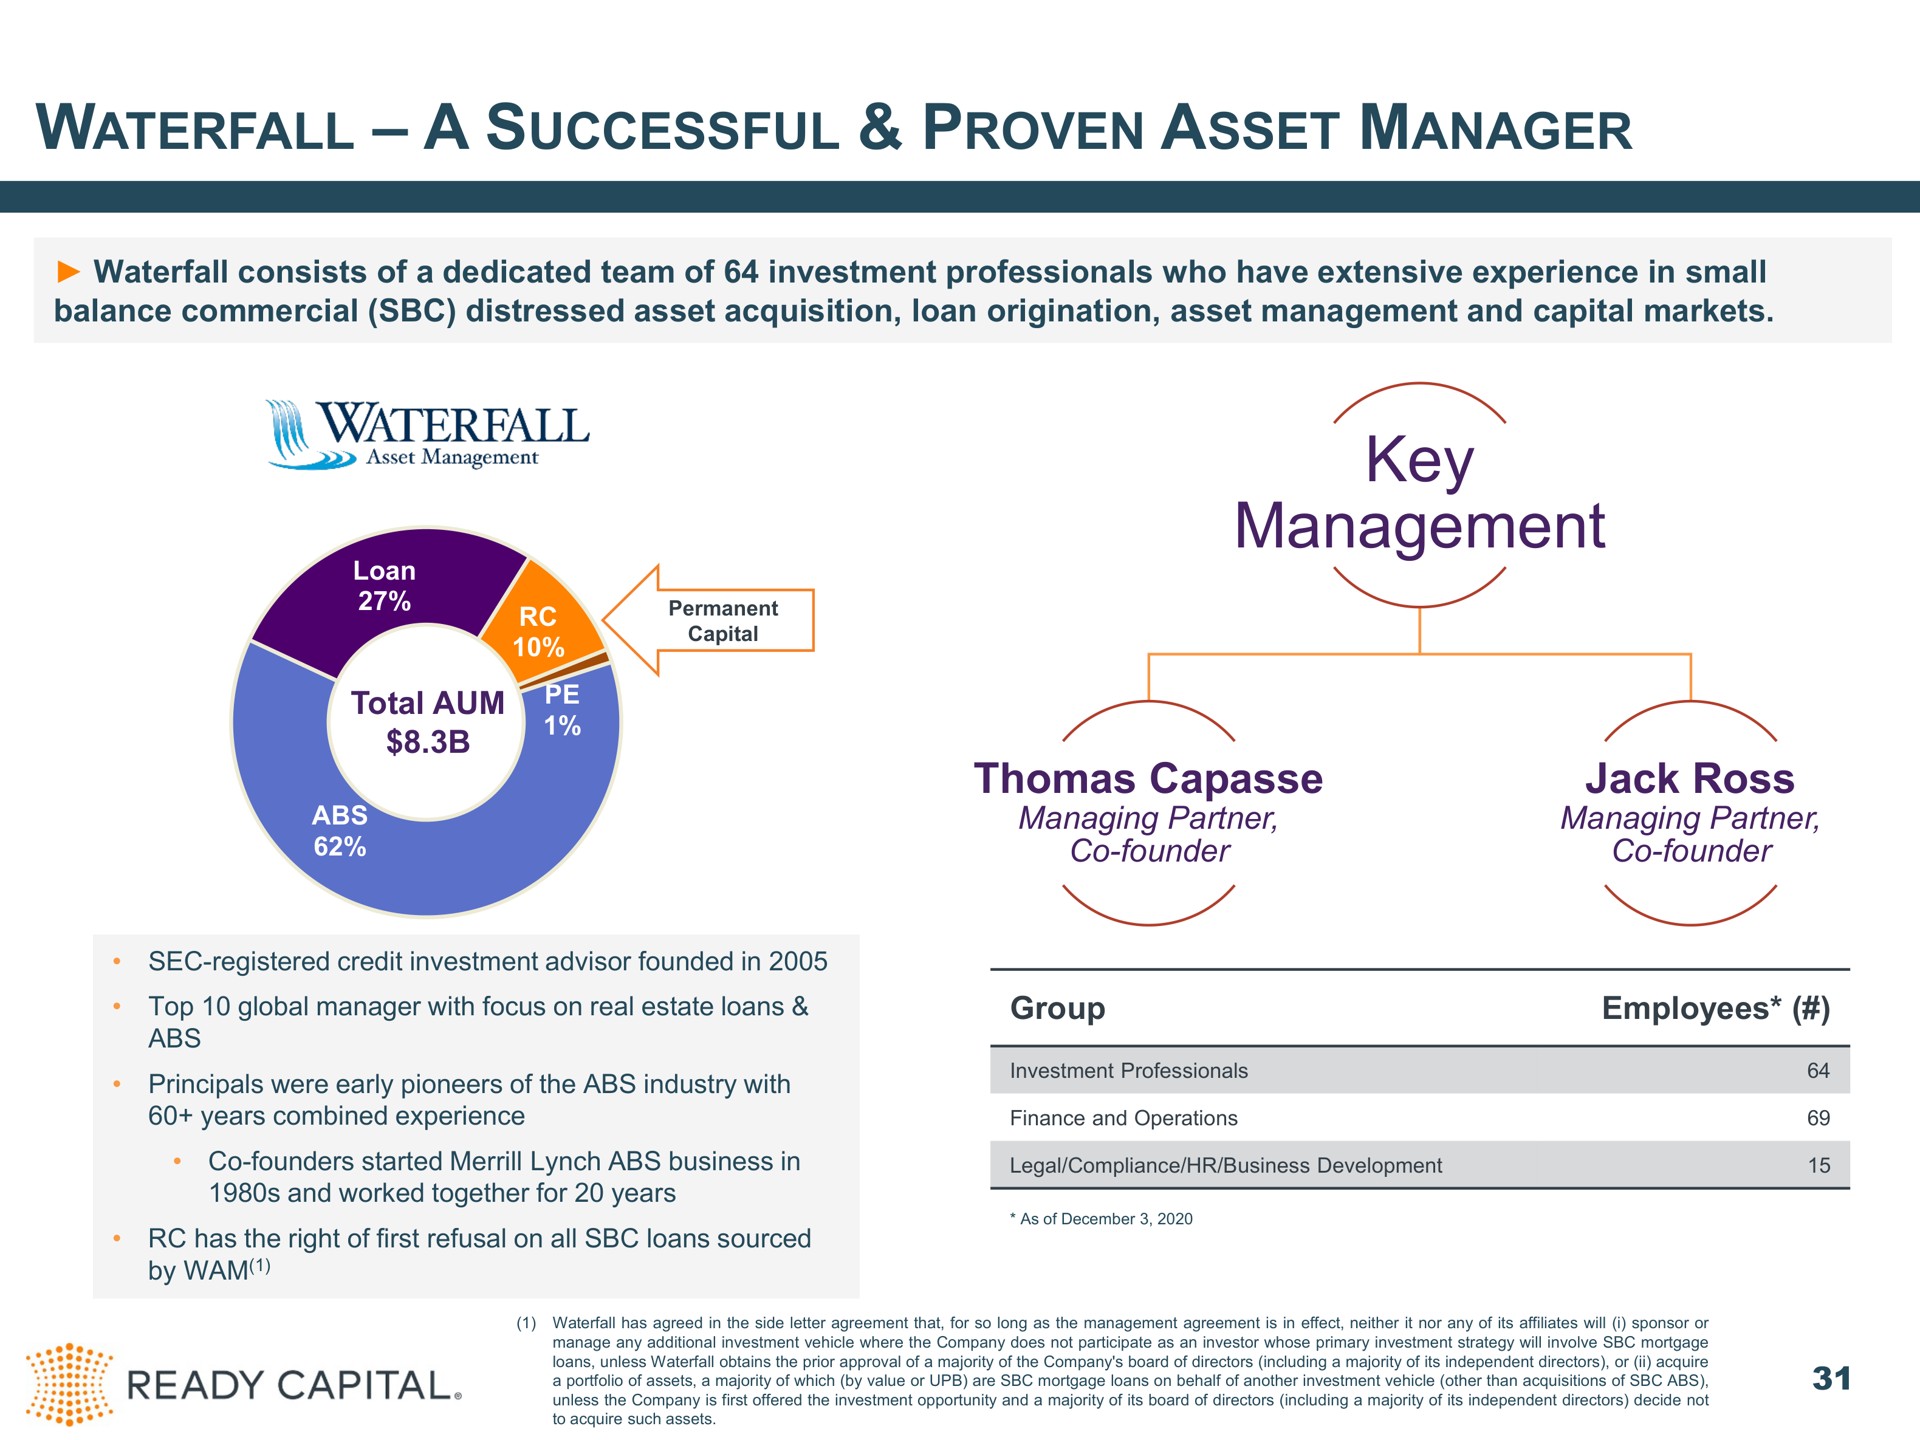 waterfall a successful proven asset manager waterfall consists of a dedicated team of investment professionals who have extensive experience in small balance commercial distressed asset acquisition loan origination asset management and capital markets total aum key management managing partner founder jack ross managing partner founder group employees so ready | Ready Capital